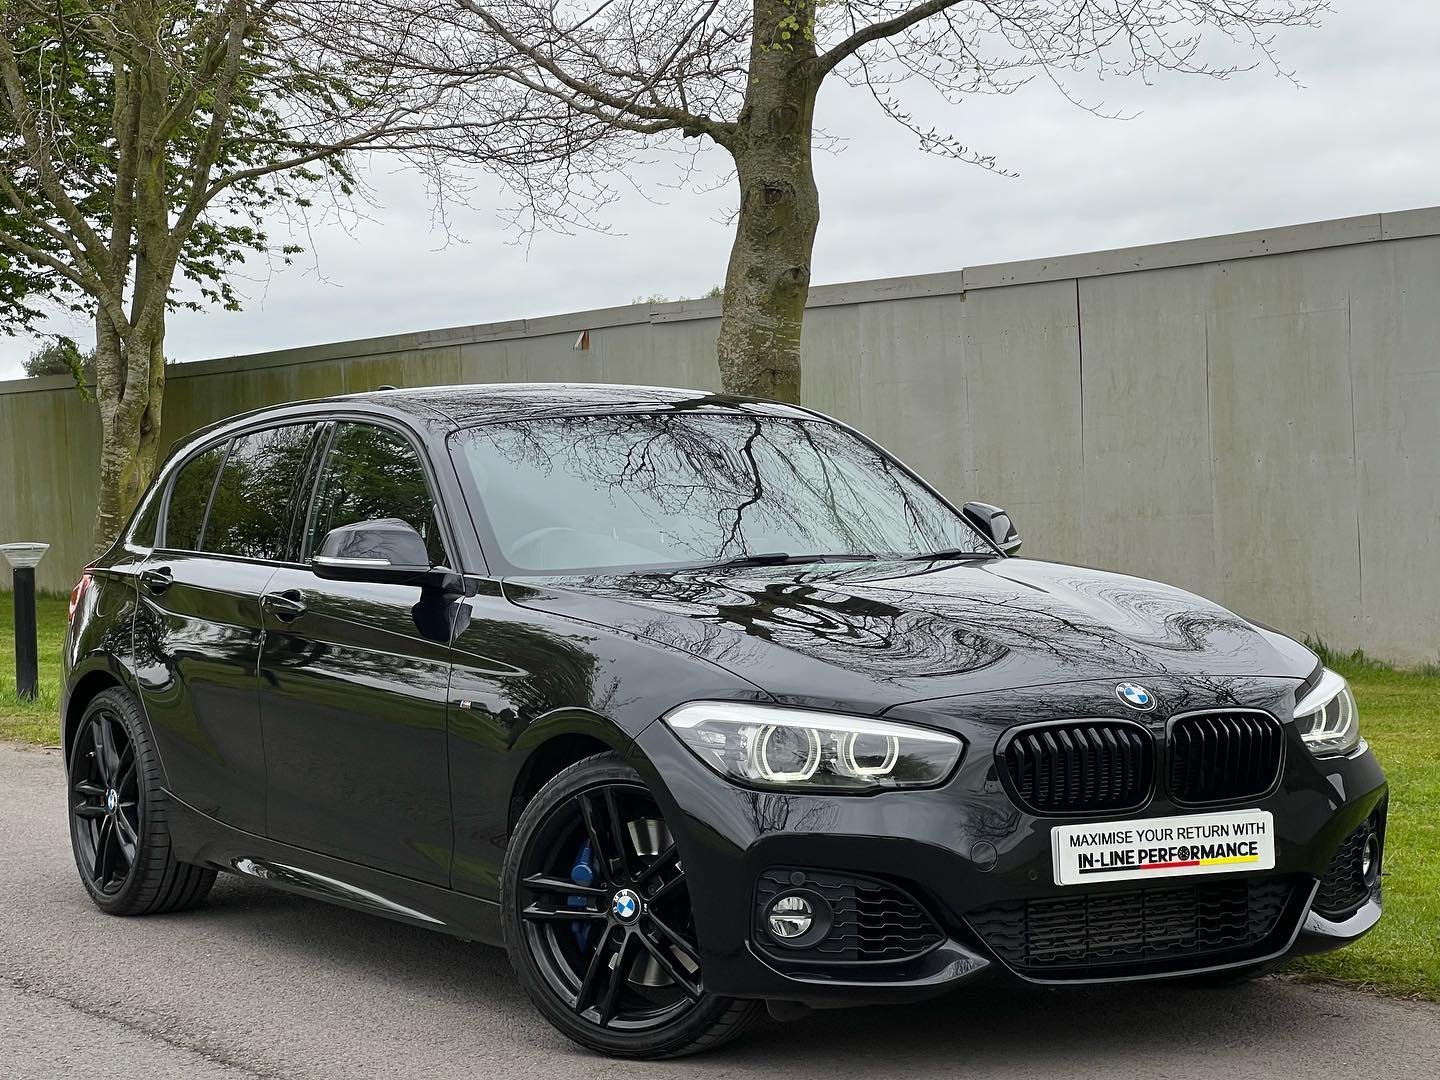 Here At IN-LINE PERFORMANCE We Take Pride And Joy Into Supplying You With Great Quality Of The Very Best Of German Engineering. We Are Proud To Present To You This 2019 BMW 118I Finished In A Desirable Black Sapphire  With Black Dokota Leather Interi